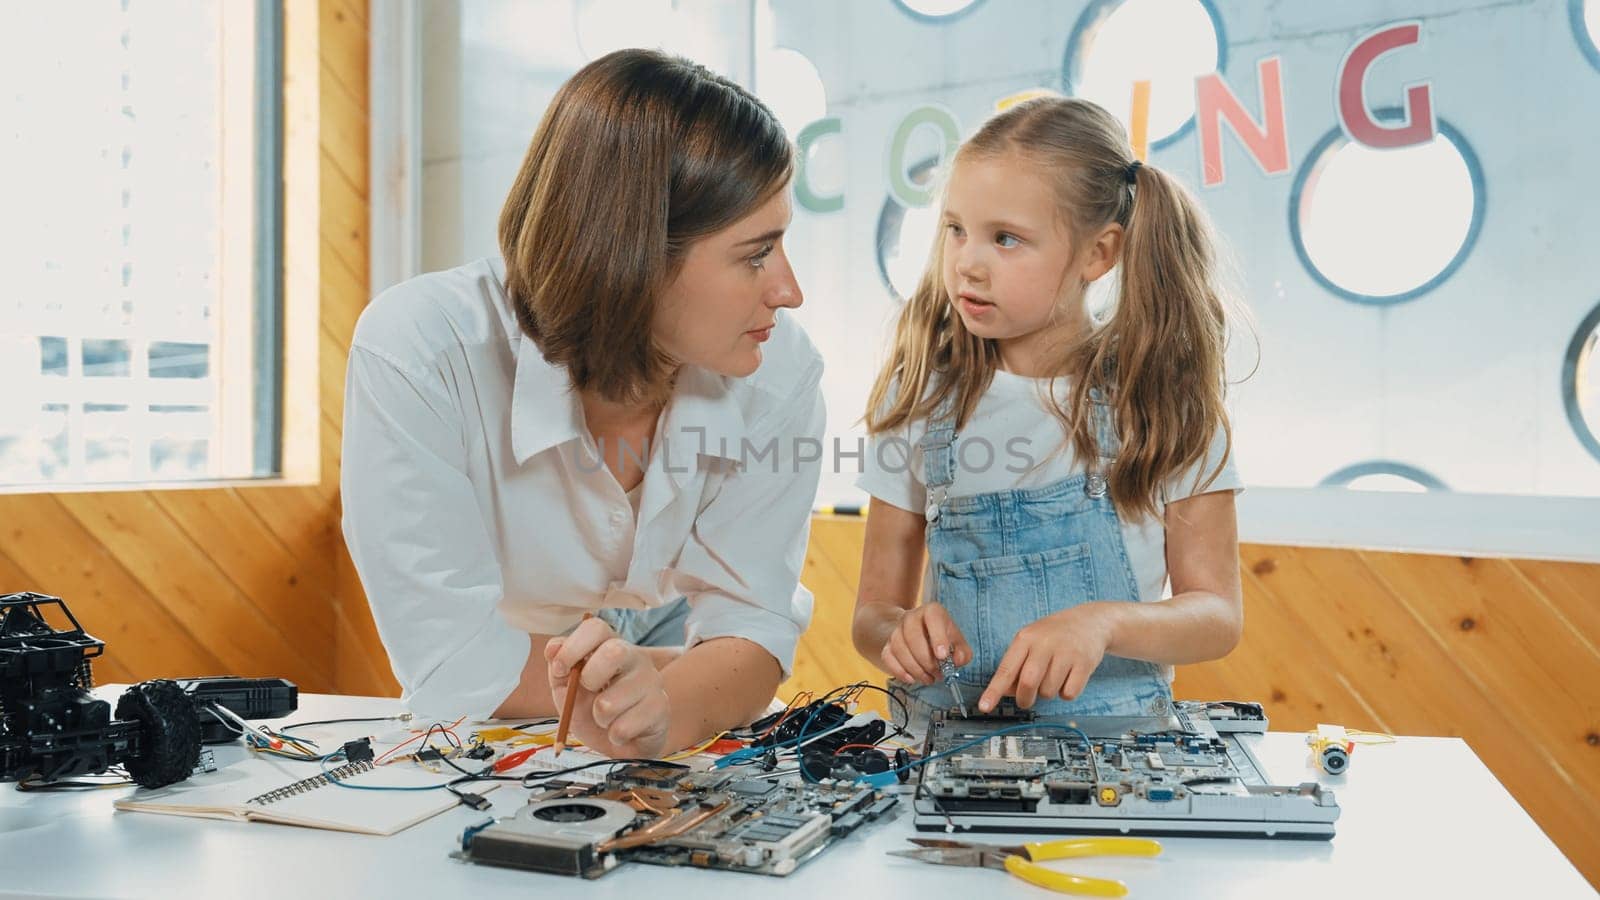 Young smart caucasian teacher teaching students about part of electronic board. Expert girl learn about digital electrical tool and fixing motherboard at table with chips and wires placed. Erudition.